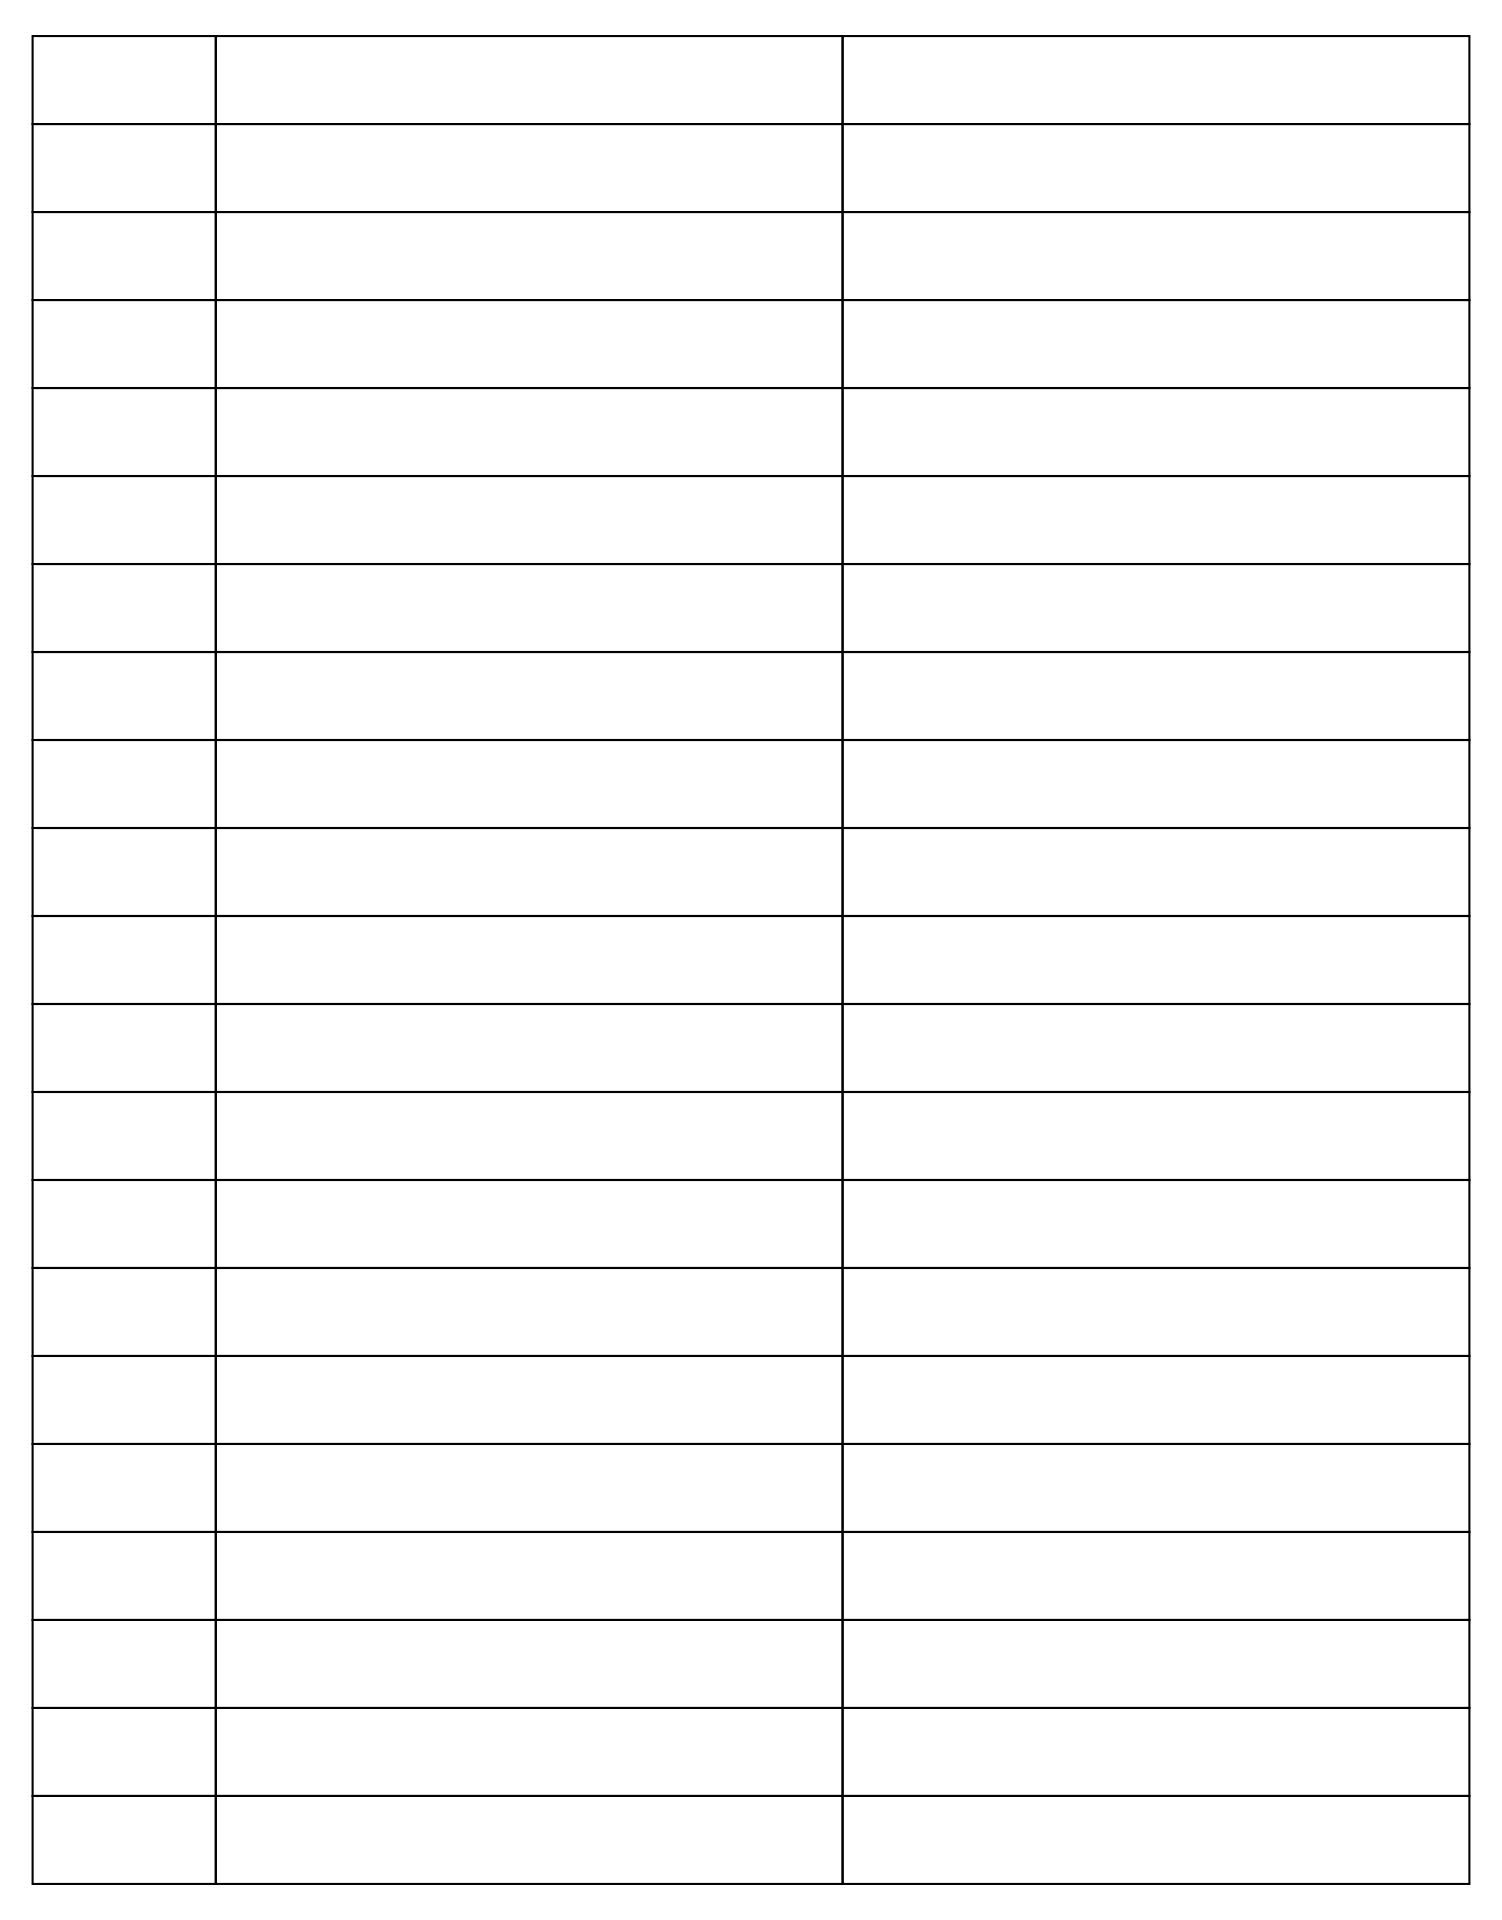 Printable Pdf Of Graph Template With 14 Rows